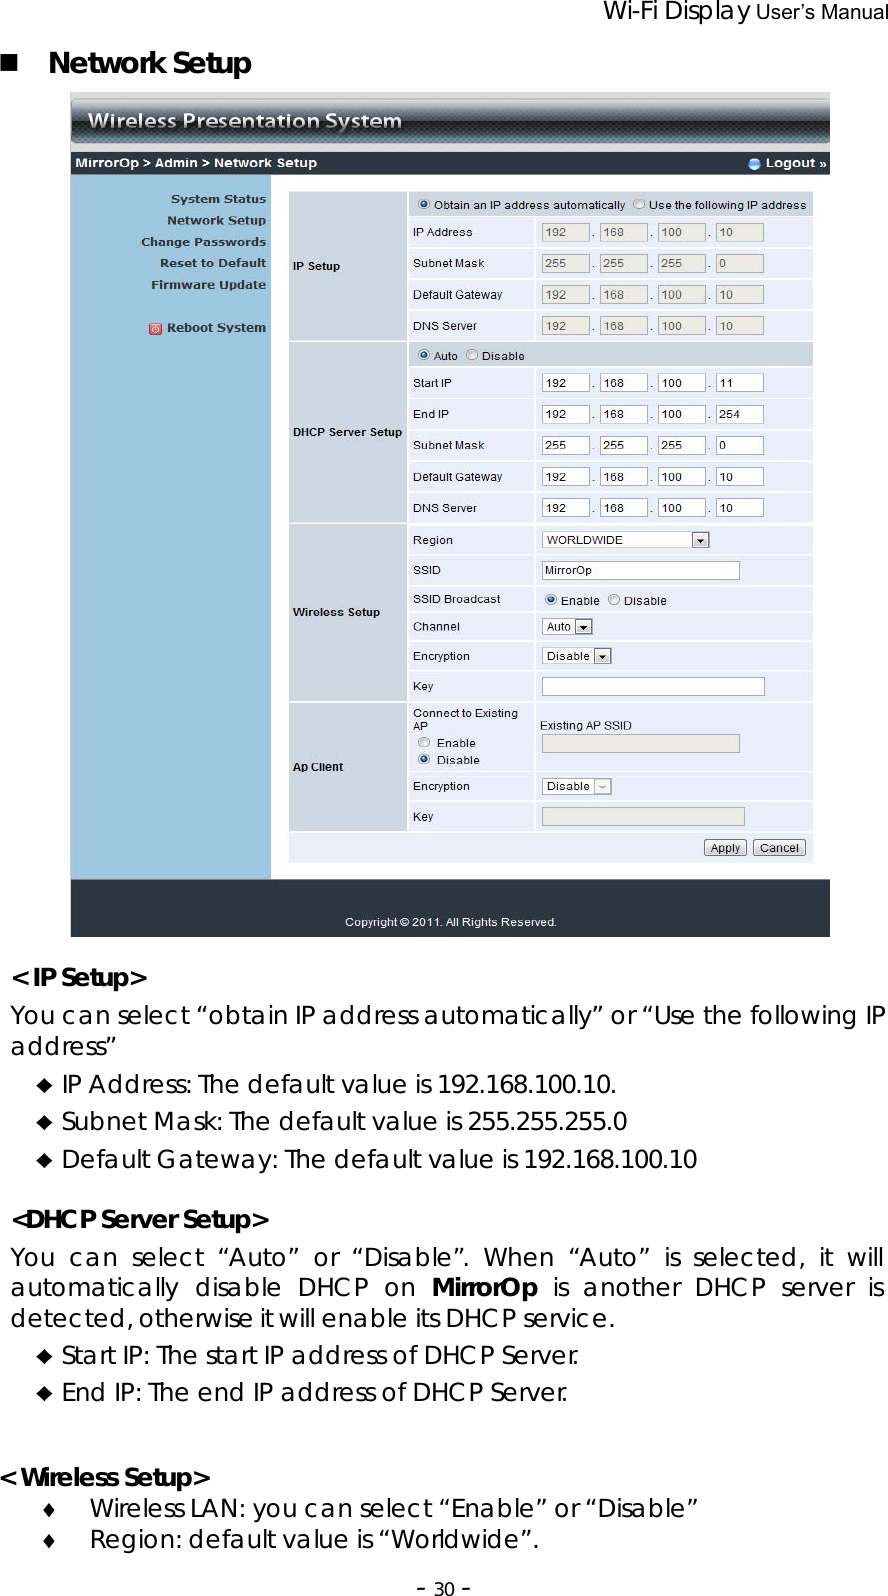                 Wi-Fi Display User’s Manual  ‐30‐ Network Setup   &lt; IP Setup&gt; You can select “obtain IP address automatically” or “Use the following IP address” ♦ IP Address: The default value is 192.168.100.10. ♦ Subnet Mask: The default value is 255.255.255.0 ♦ Default Gateway: The default value is 192.168.100.10  &lt;DHCP Server Setup&gt; You can select “Auto” or “Disable”. When “Auto” is selected, it will automatically disable DHCP on MirrorOp is another DHCP server is detected, otherwise it will enable its DHCP service. ♦ Start IP: The start IP address of DHCP Server. ♦ End IP: The end IP address of DHCP Server.   &lt; Wireless Setup&gt; ♦ Wireless LAN: you can select “Enable” or “Disable” ♦ Region: default value is “Worldwide”. 